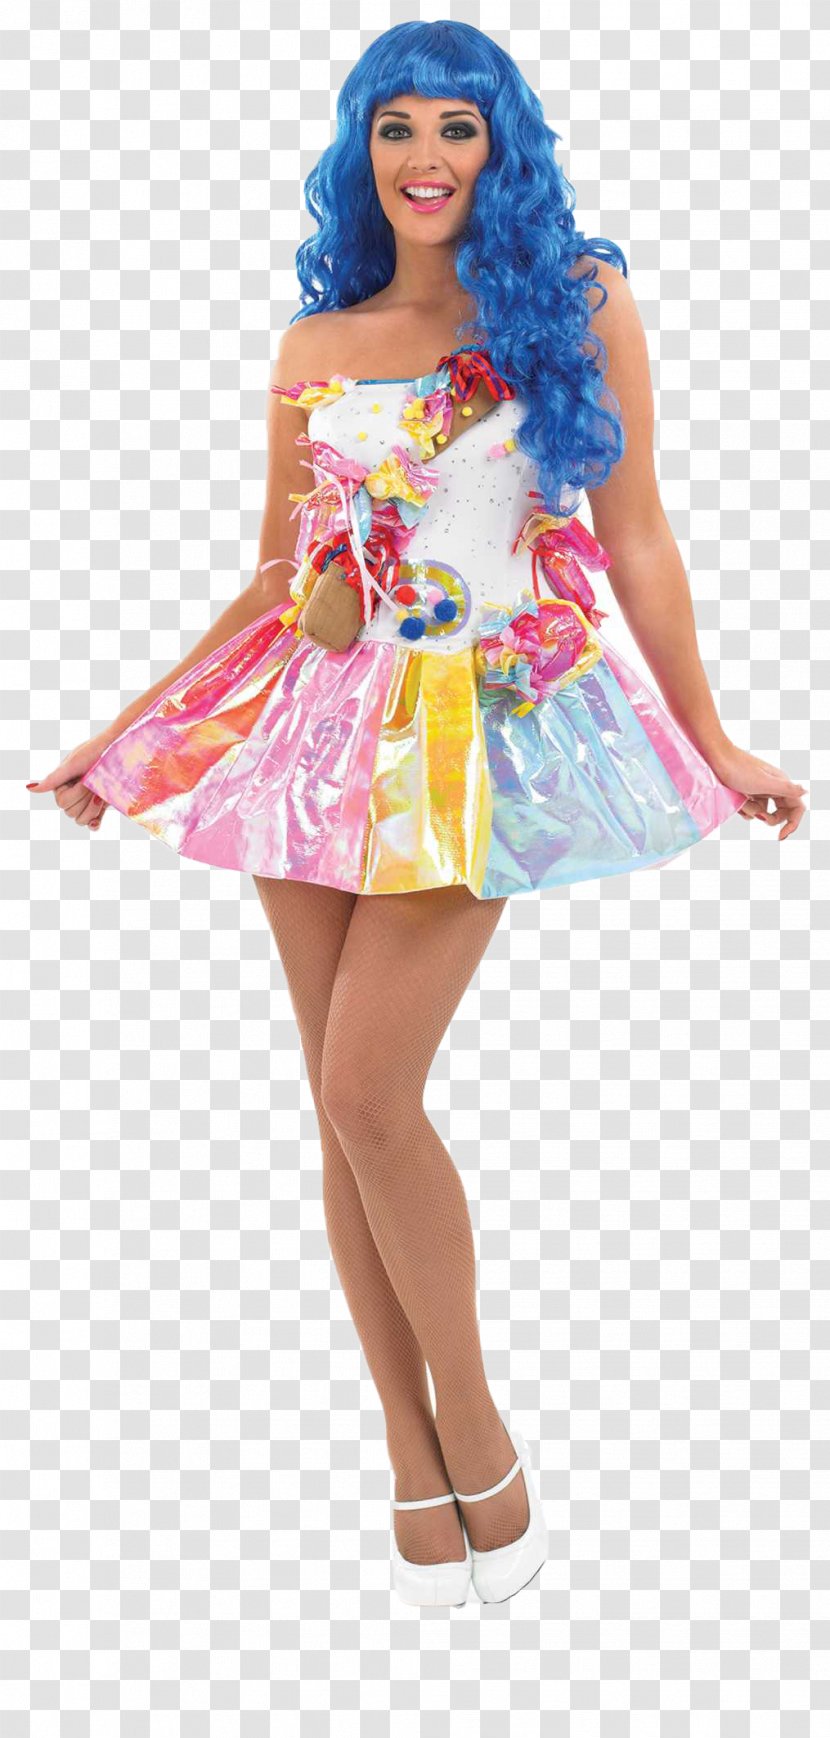 Popstar: Never Stop Stopping Costume Party Dress Wig - Frame - Katy Perry Transparent PNG